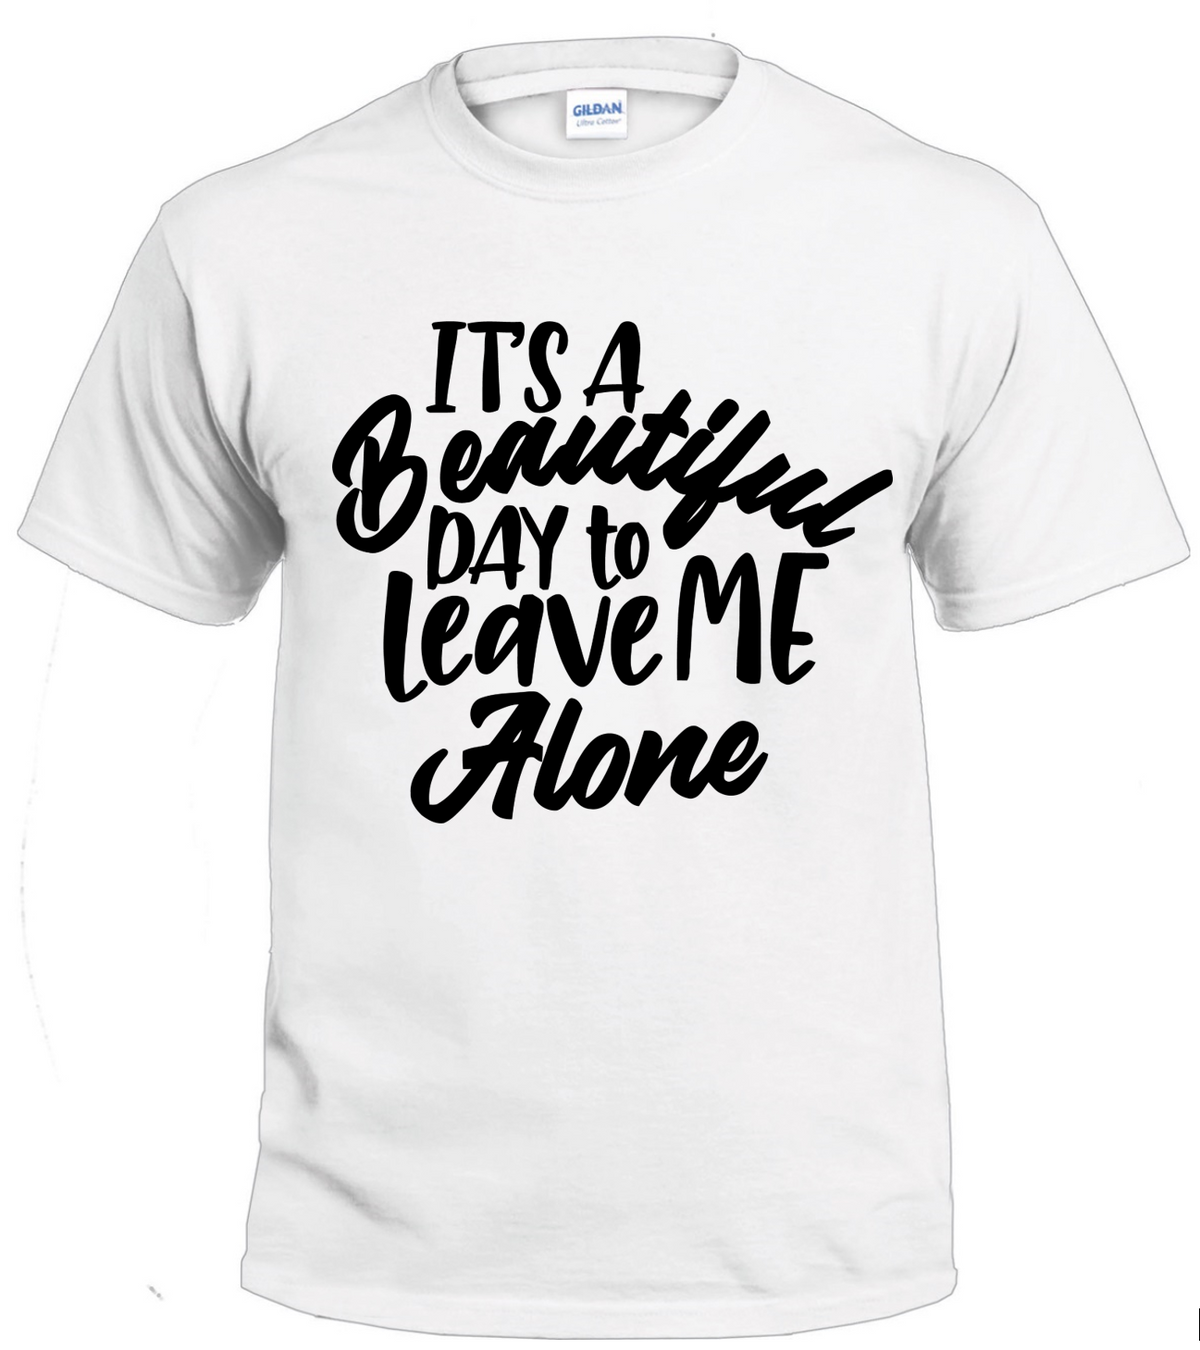 It's A Beautiful Day to Leave Me Alone - Sassy t-shirt